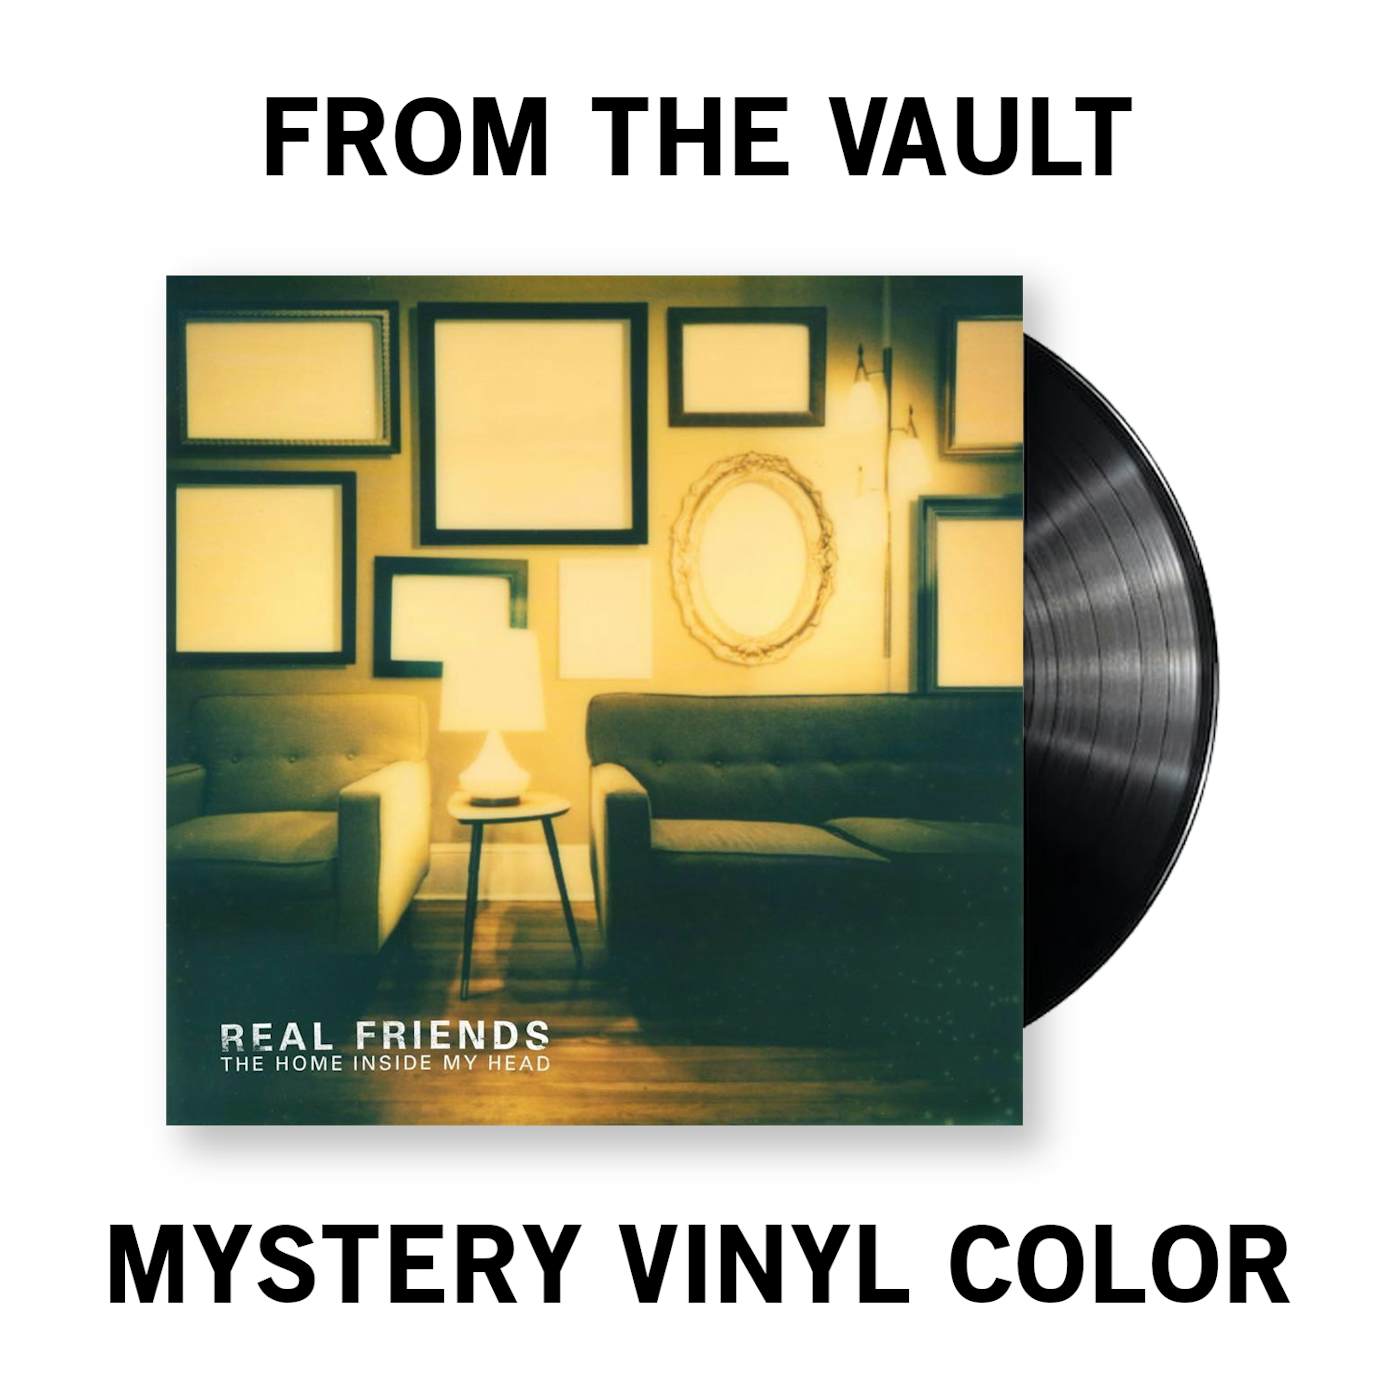 Real Friends The Home Inside Vinyl